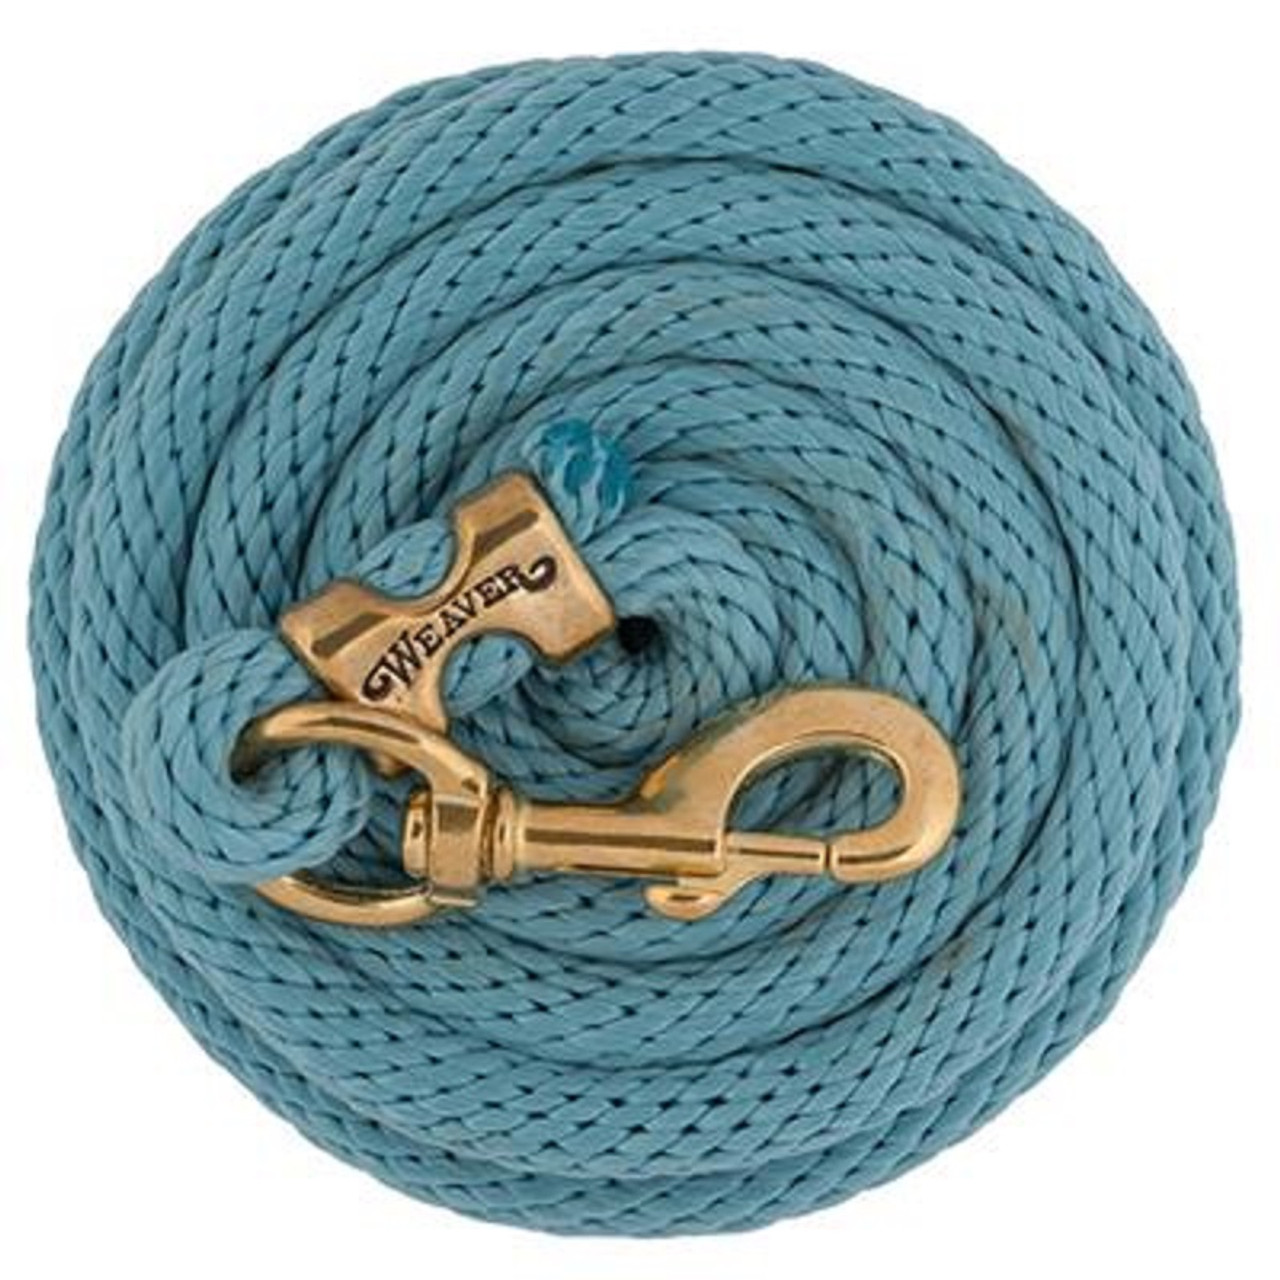 5/8 x 10' Weaver Poly Lead Rope